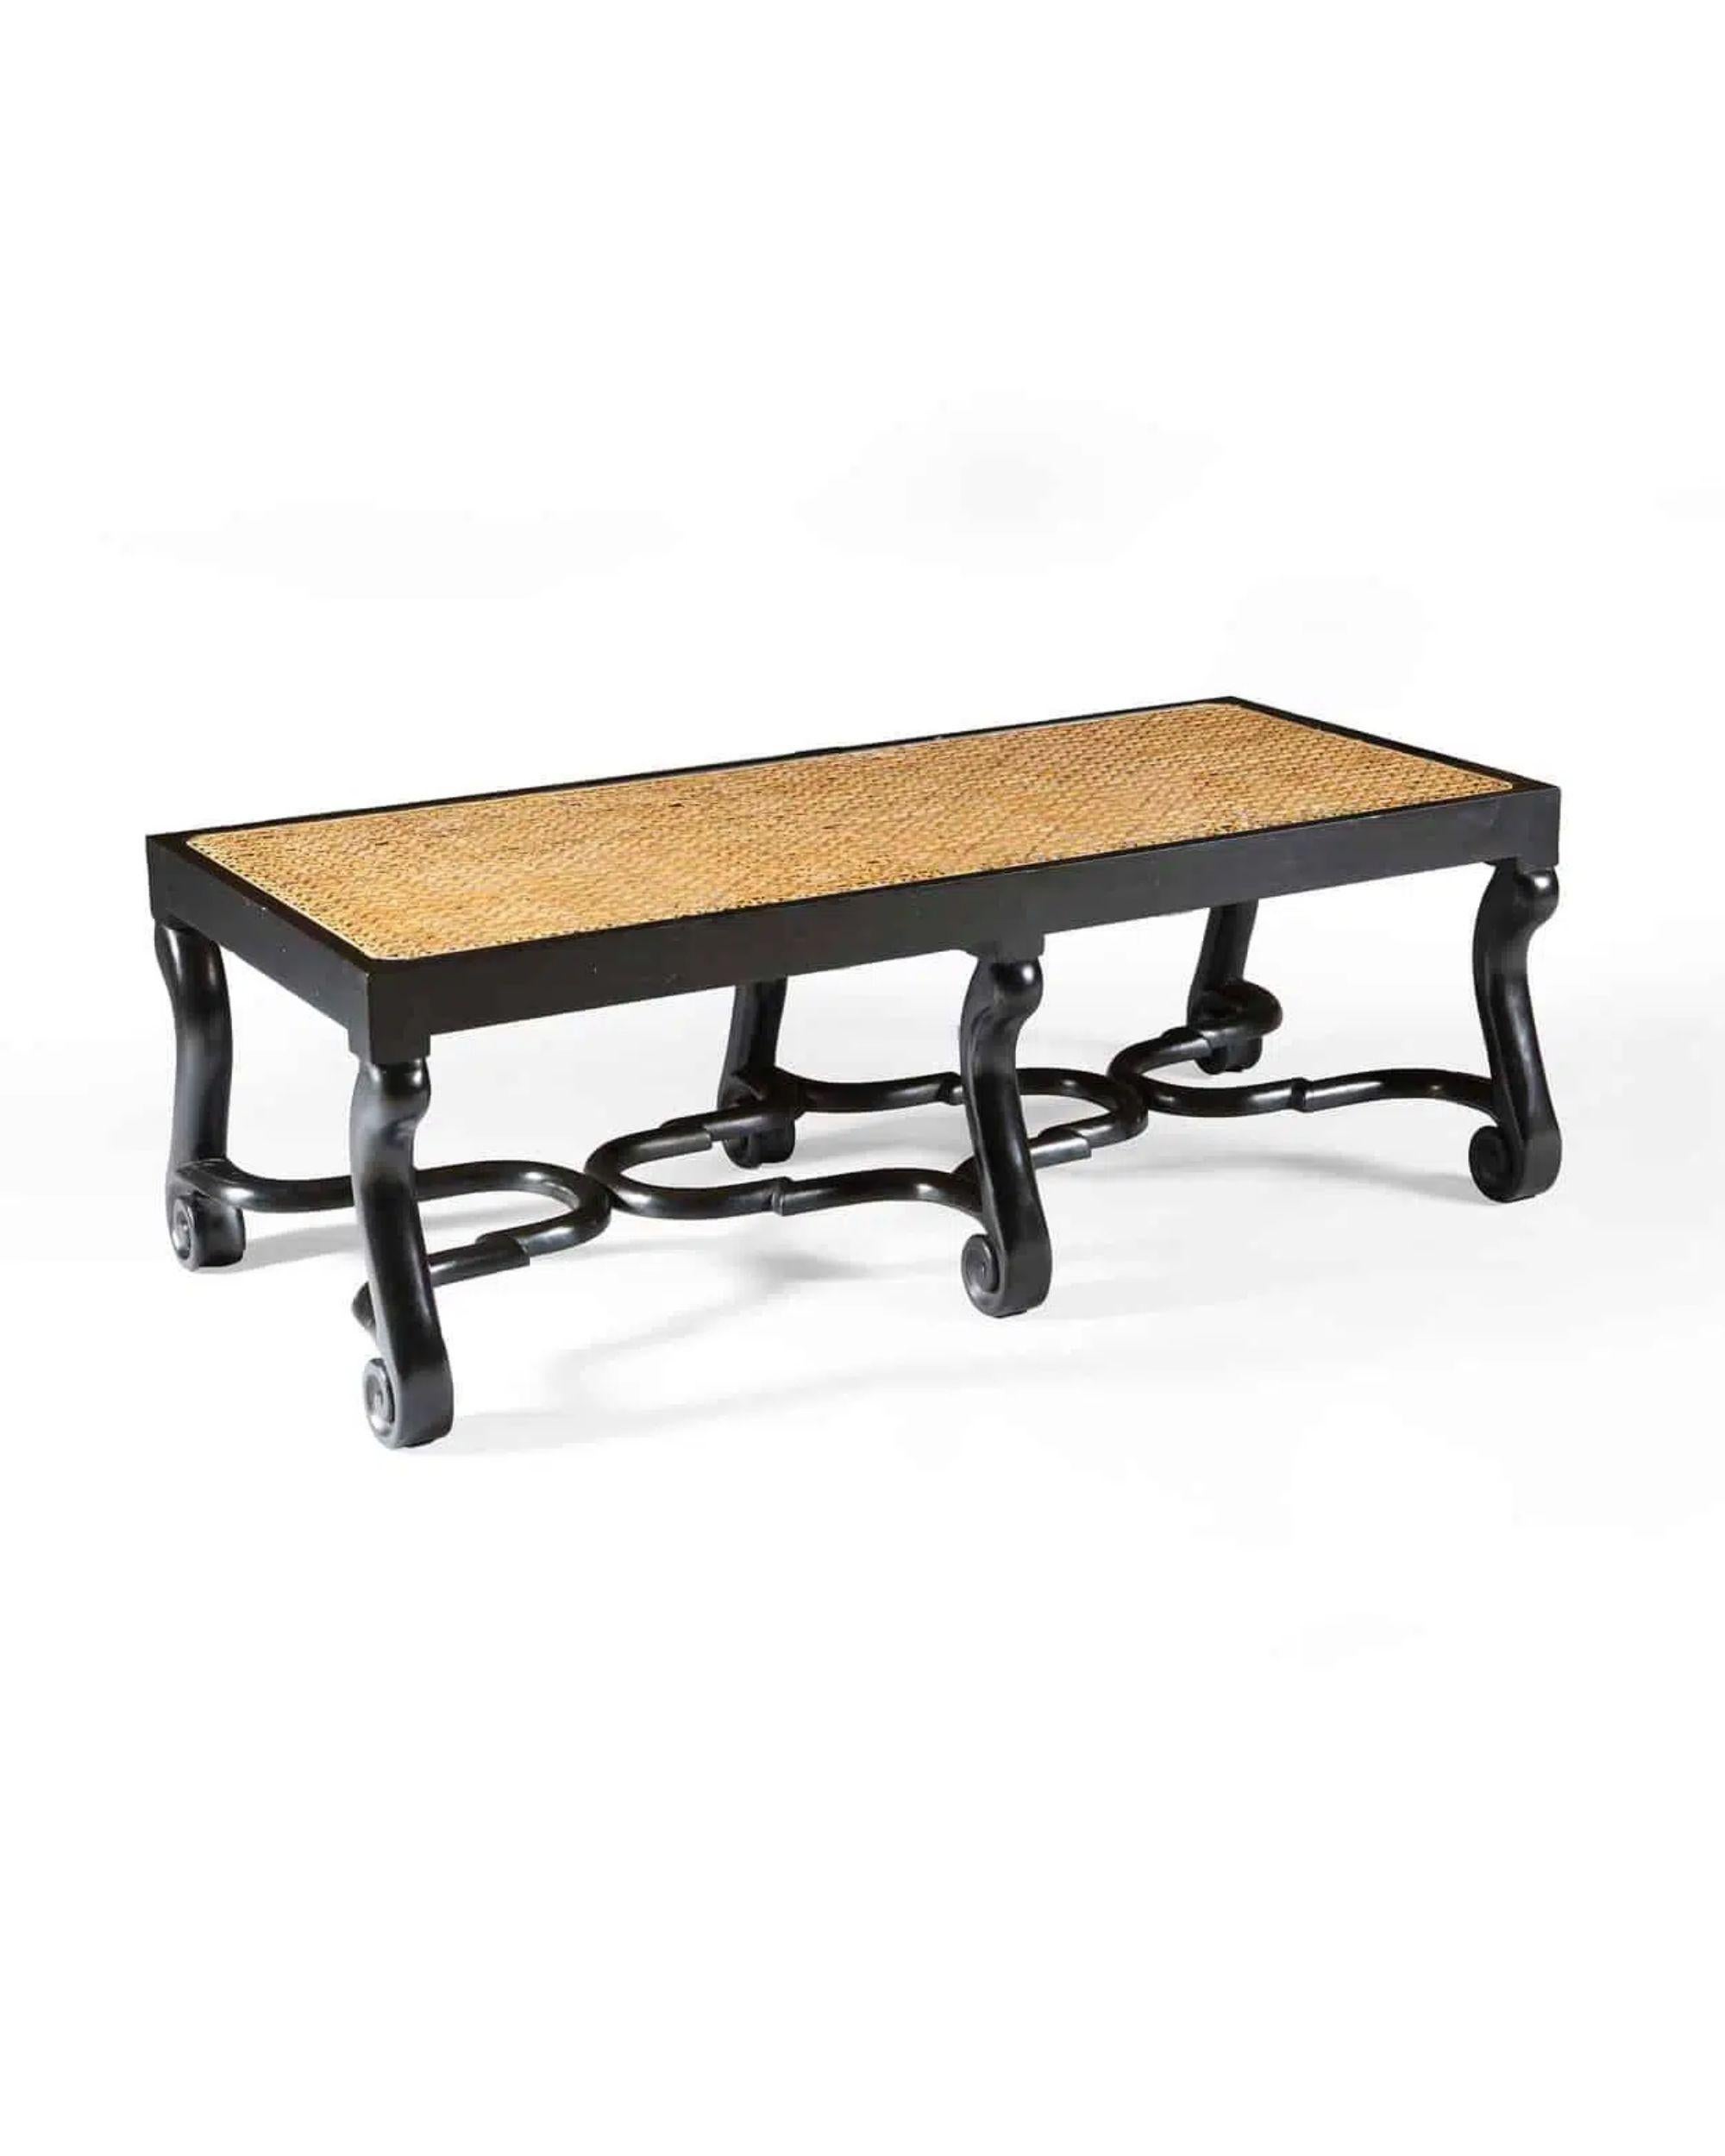 Ebonised Long caned bench with shaped voluted scrolled legs and moulded Jacobean stretchers.

Perfect used as window seats, a bench or low table

Additional information: 
Origin: England
Dimensions:
Depth: 53.5 cm (21.06 inches)
Height of Seat: 40